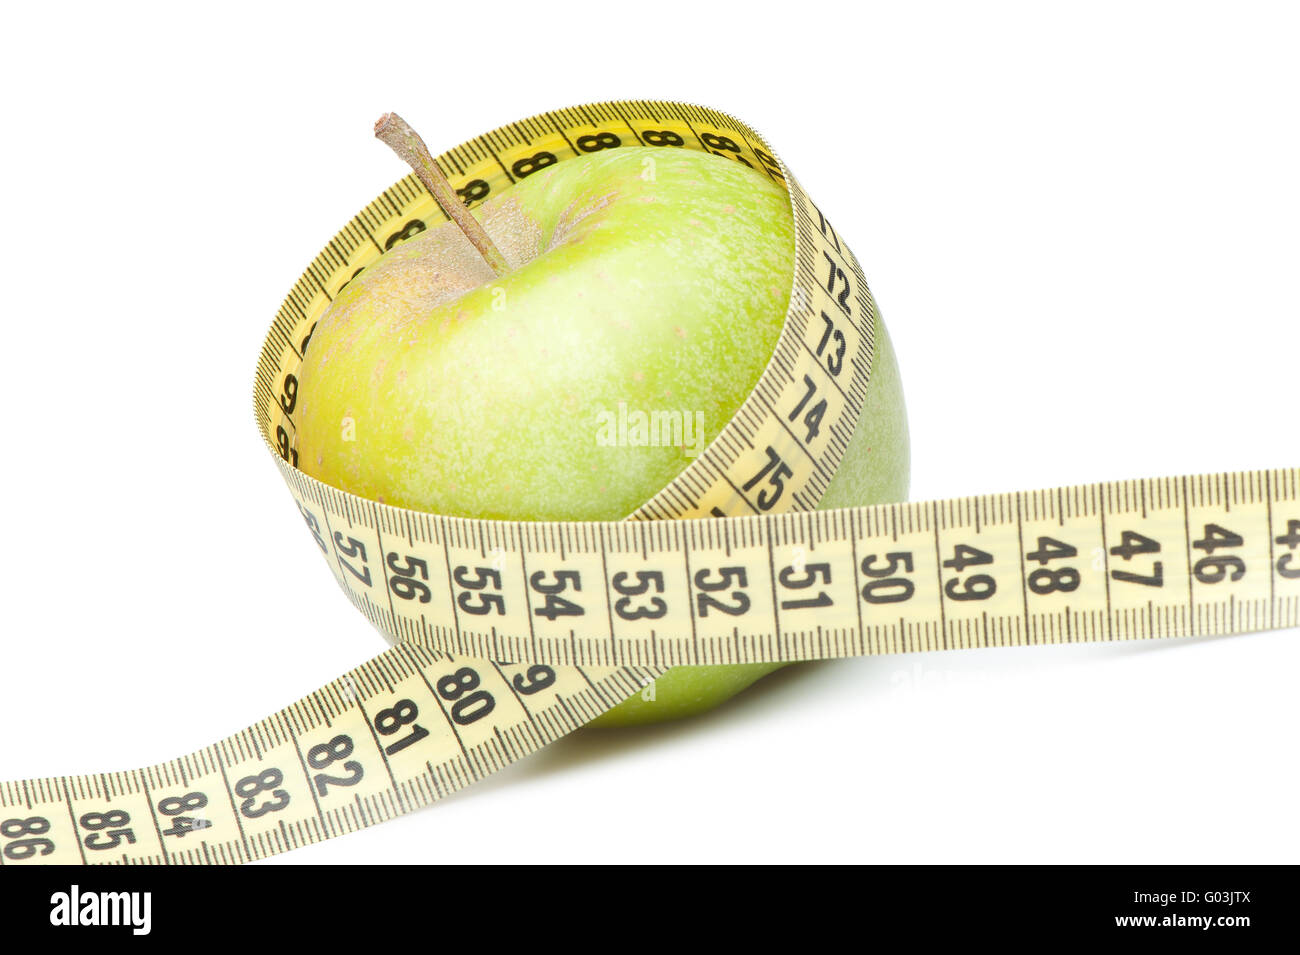 Closeup of a green apple with a measuring tape. Isolated on white Stock Photo